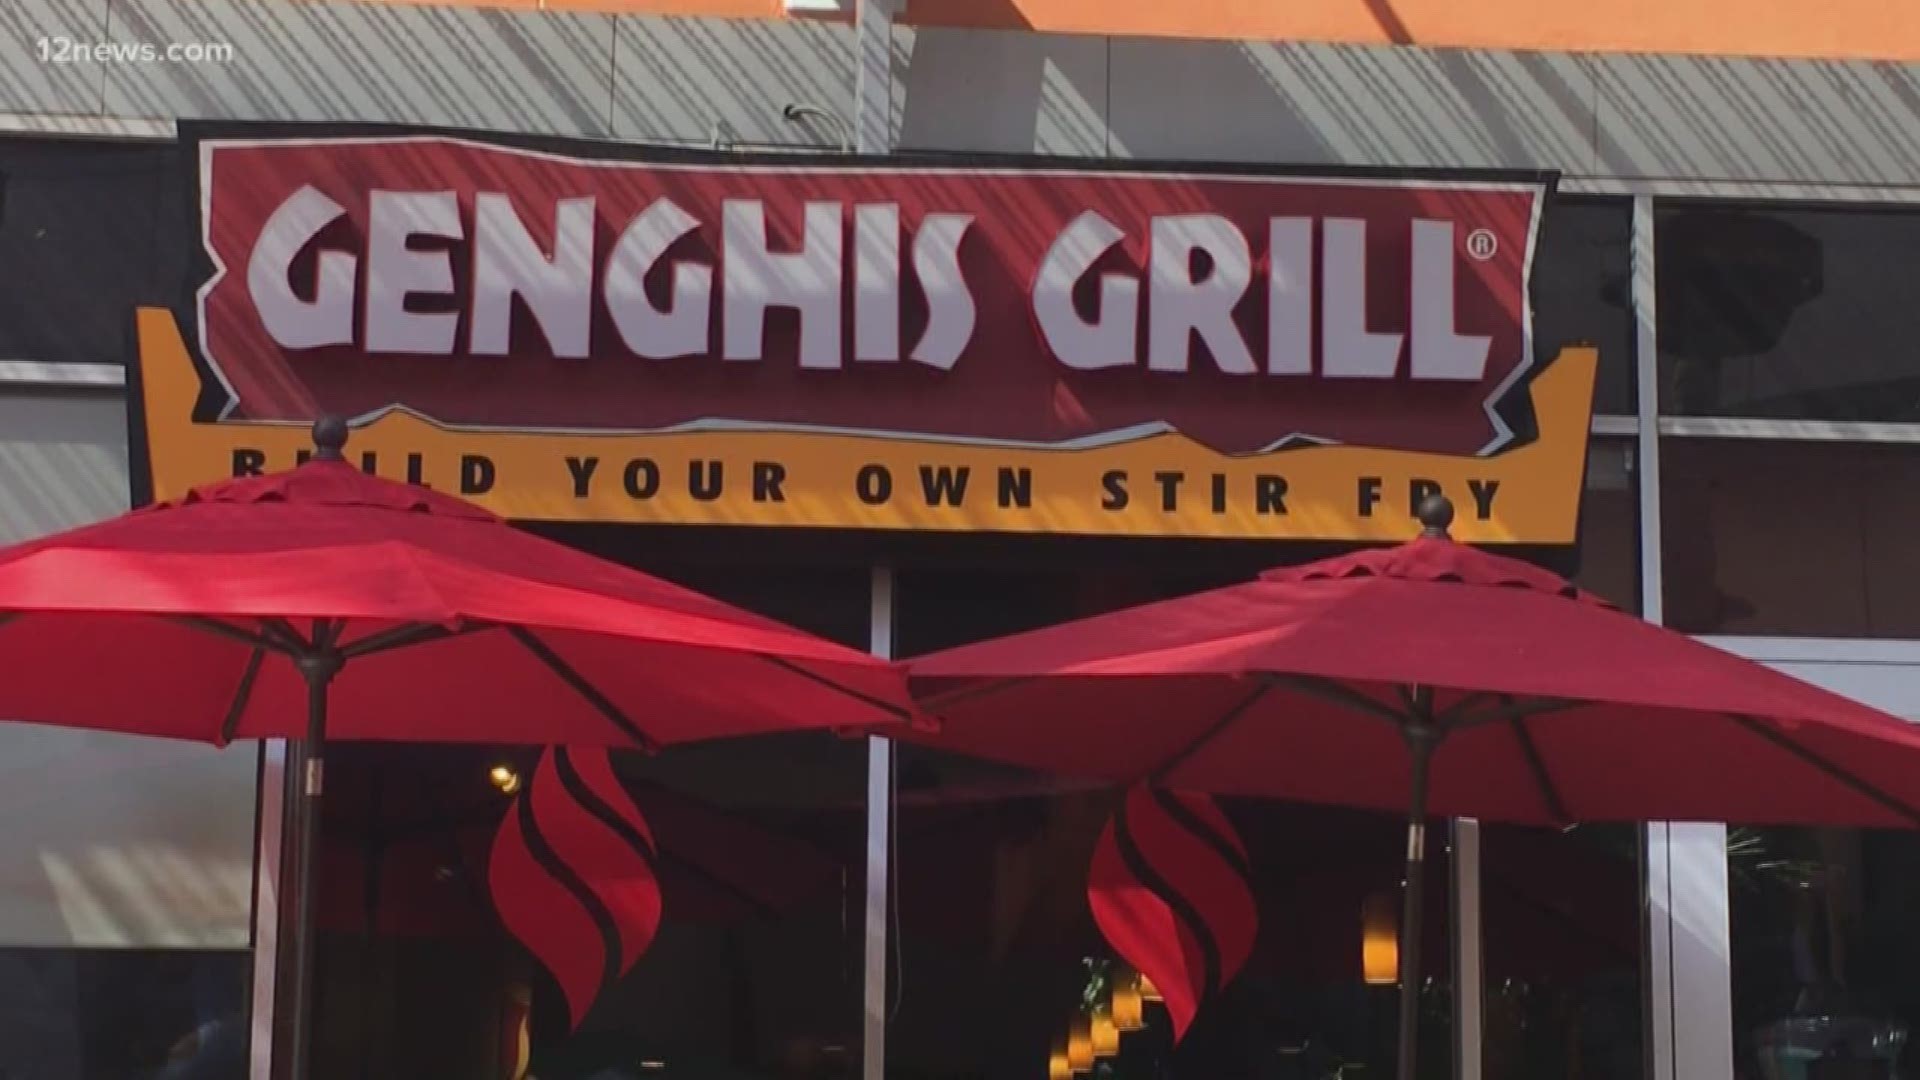 If you ate at the Genghis Grill in Tempe Marketplace in June you may have been exposed to Hepatitis A. County health experts say the risk of transmission is very low, but if you have been exposed the Hepatitis A vaccine is only effective within two weeks of exposure.